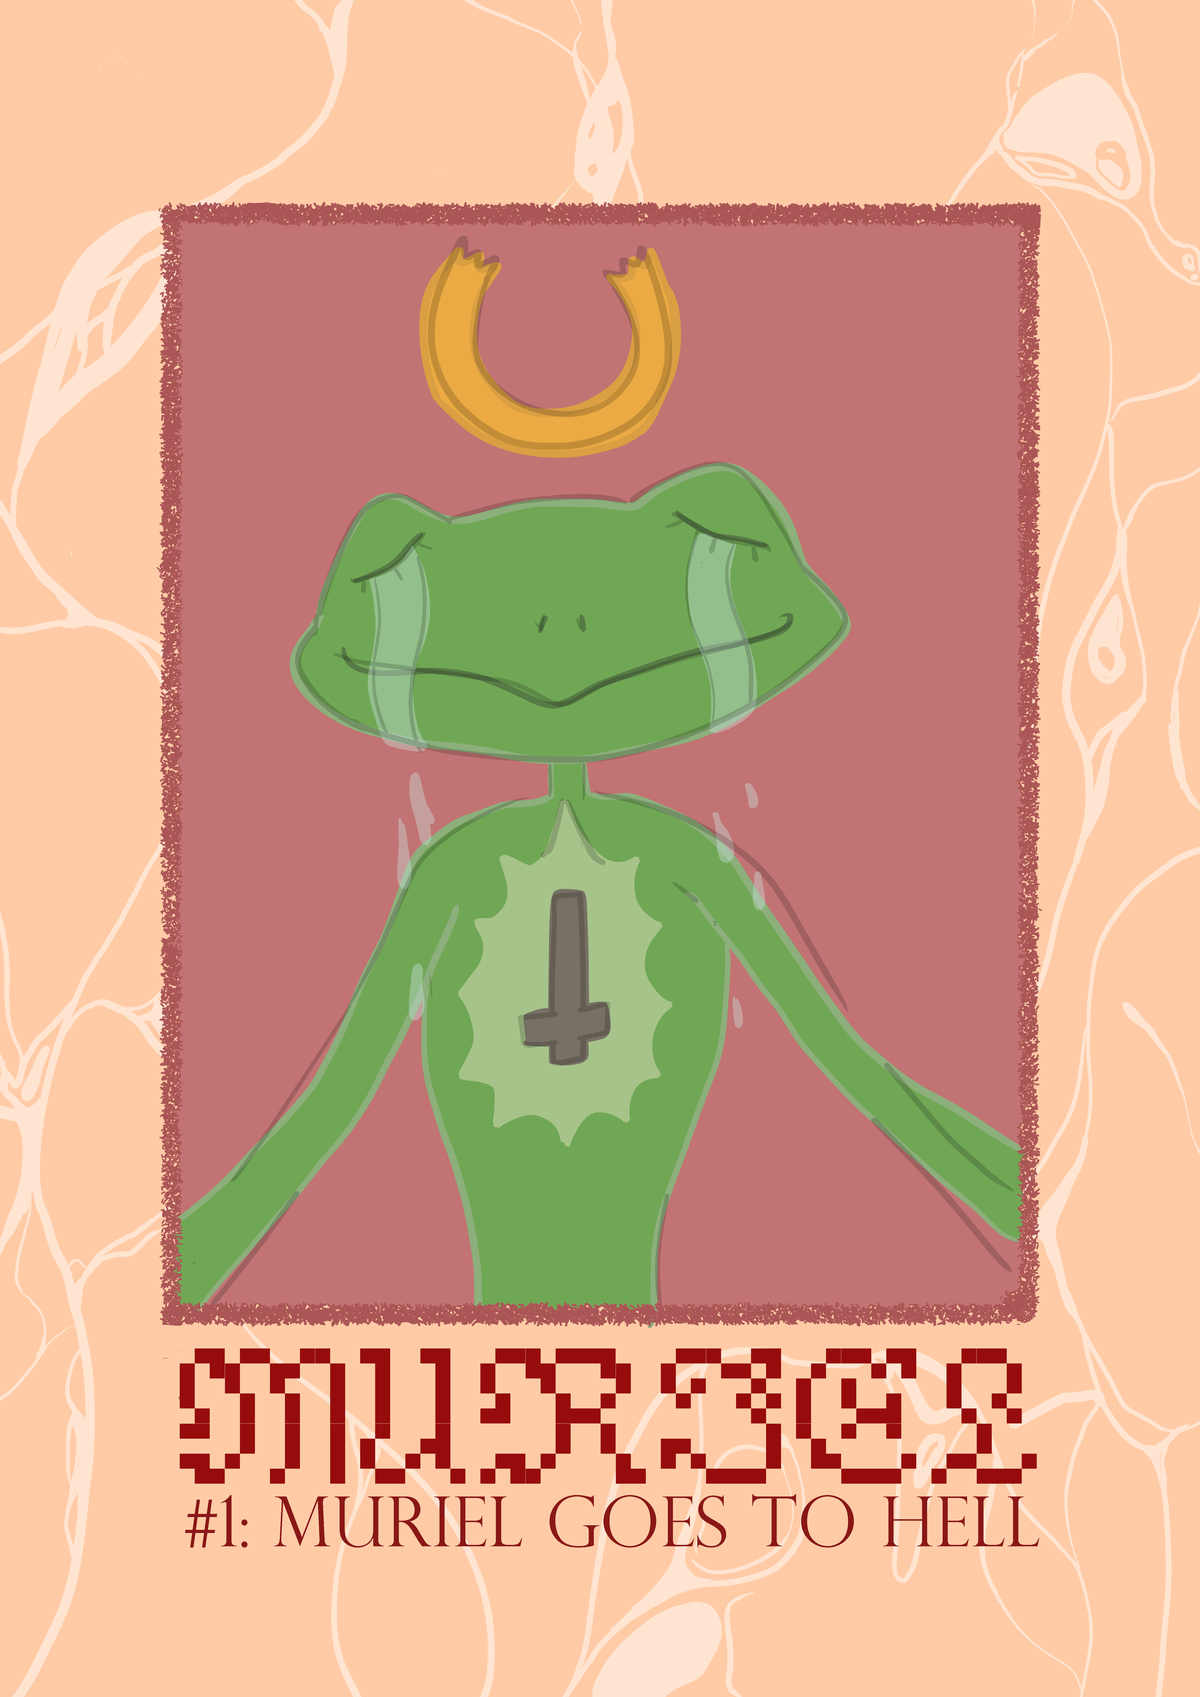 Issue 1 of the comic "Muriel" by Mary Love, a contributor to "The Creatives."  (Mary Love)